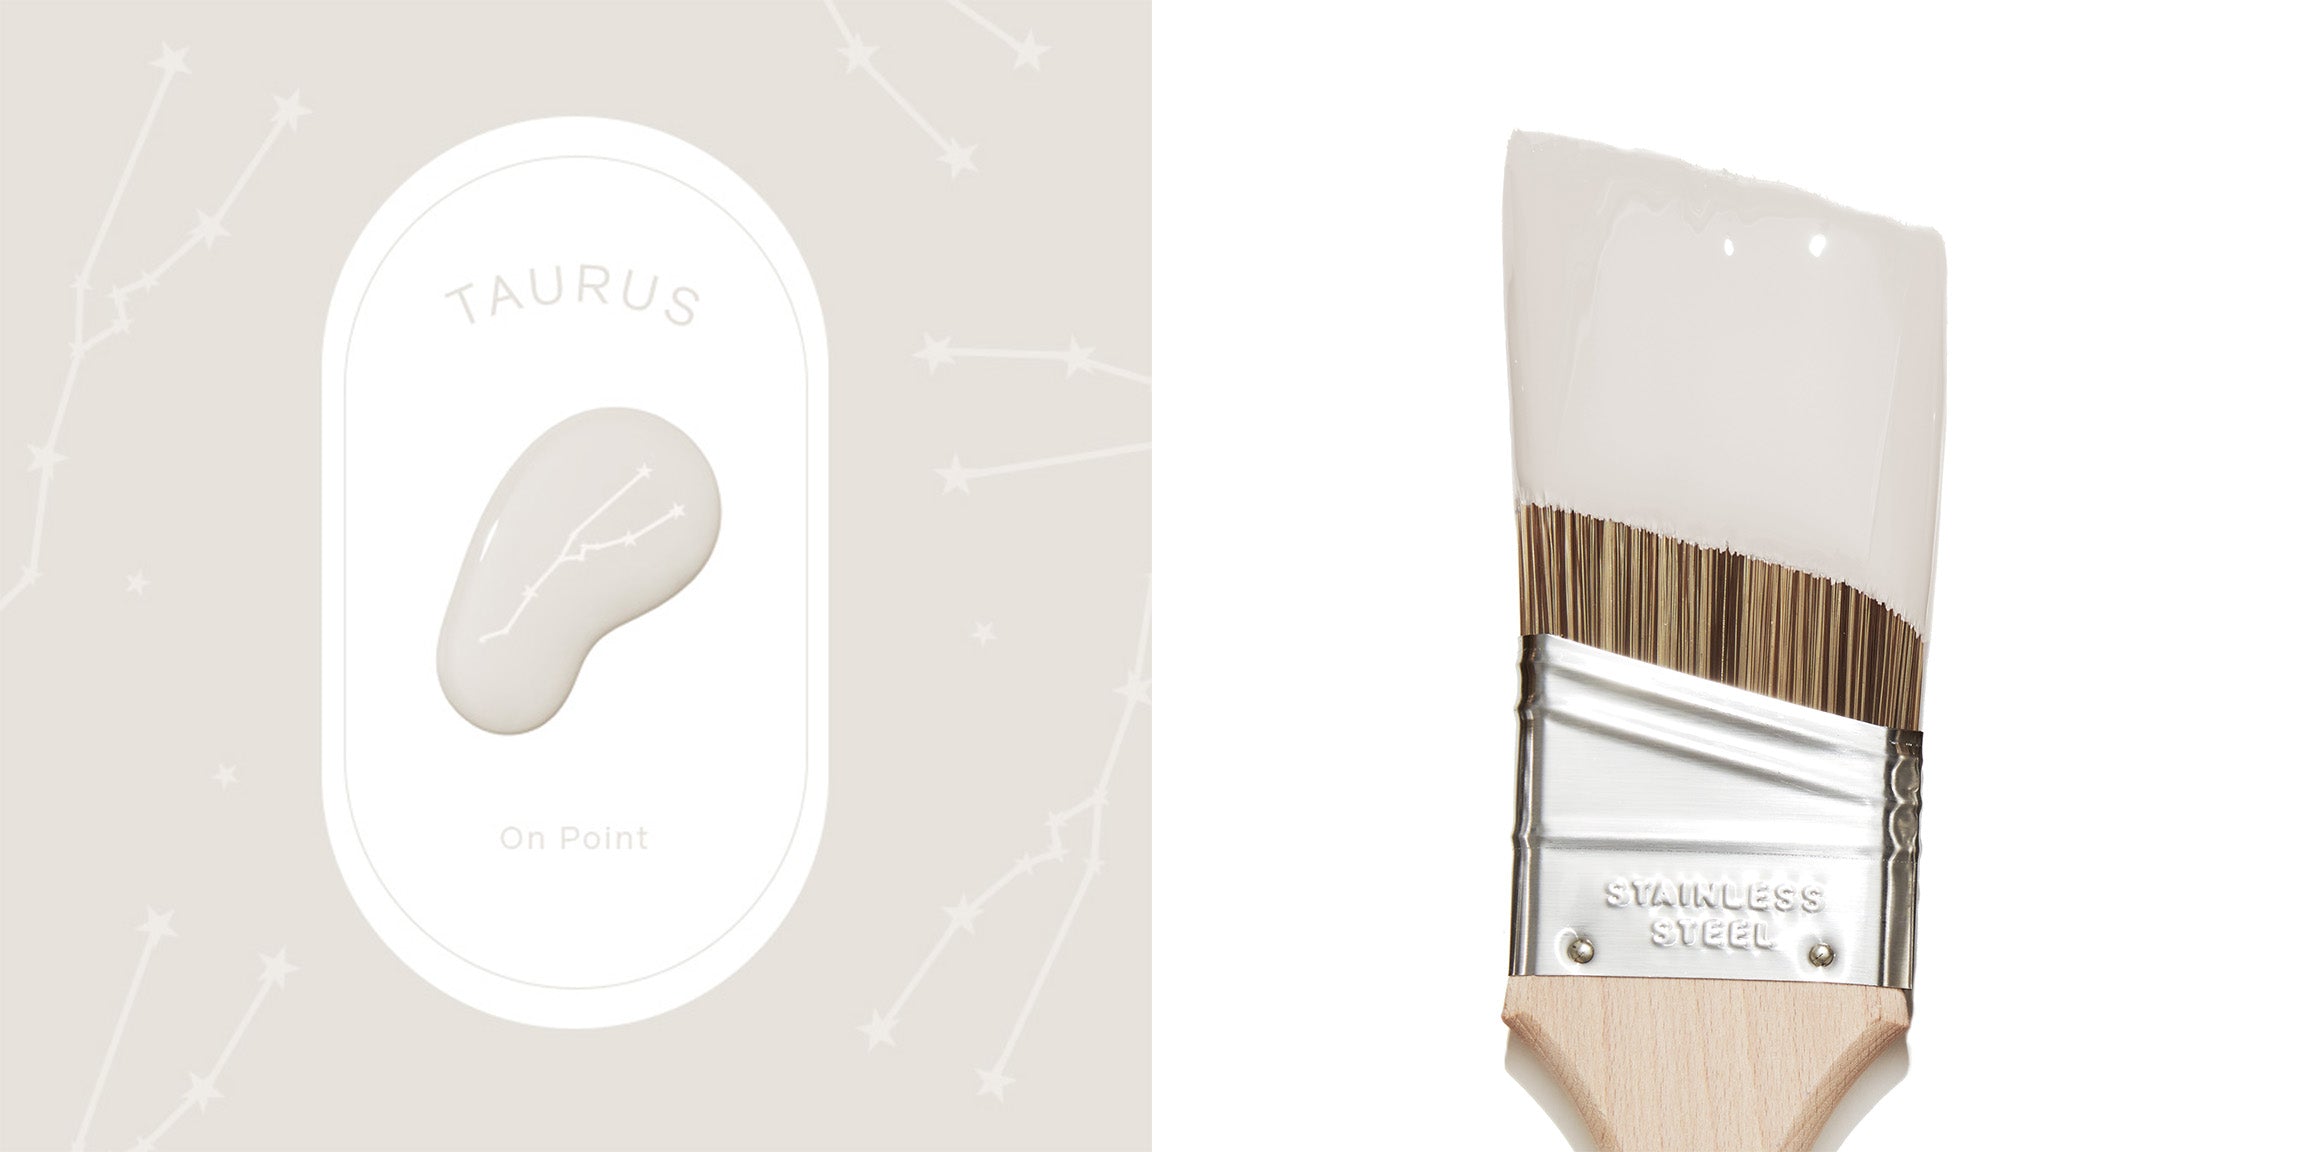 Get your 2023 horoscope and find the perfect paint colors for your zodiac. For Taurus, it’s On Point — a warm neutral paint color from Clare.